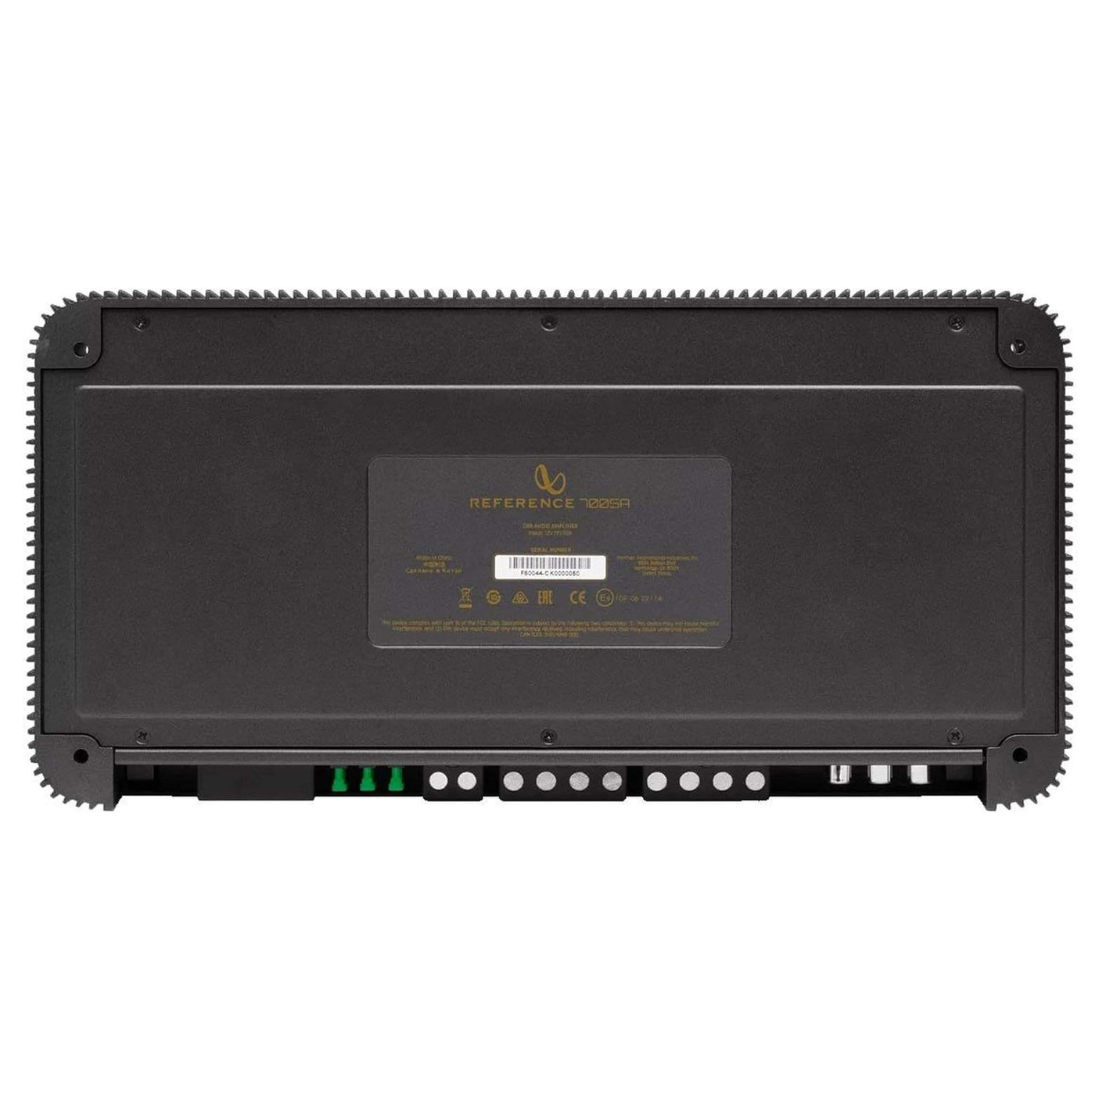 Infinity Reference 7005A 5-Channel 50W x 4 RMS Power Class-AB/D Car Amplifier